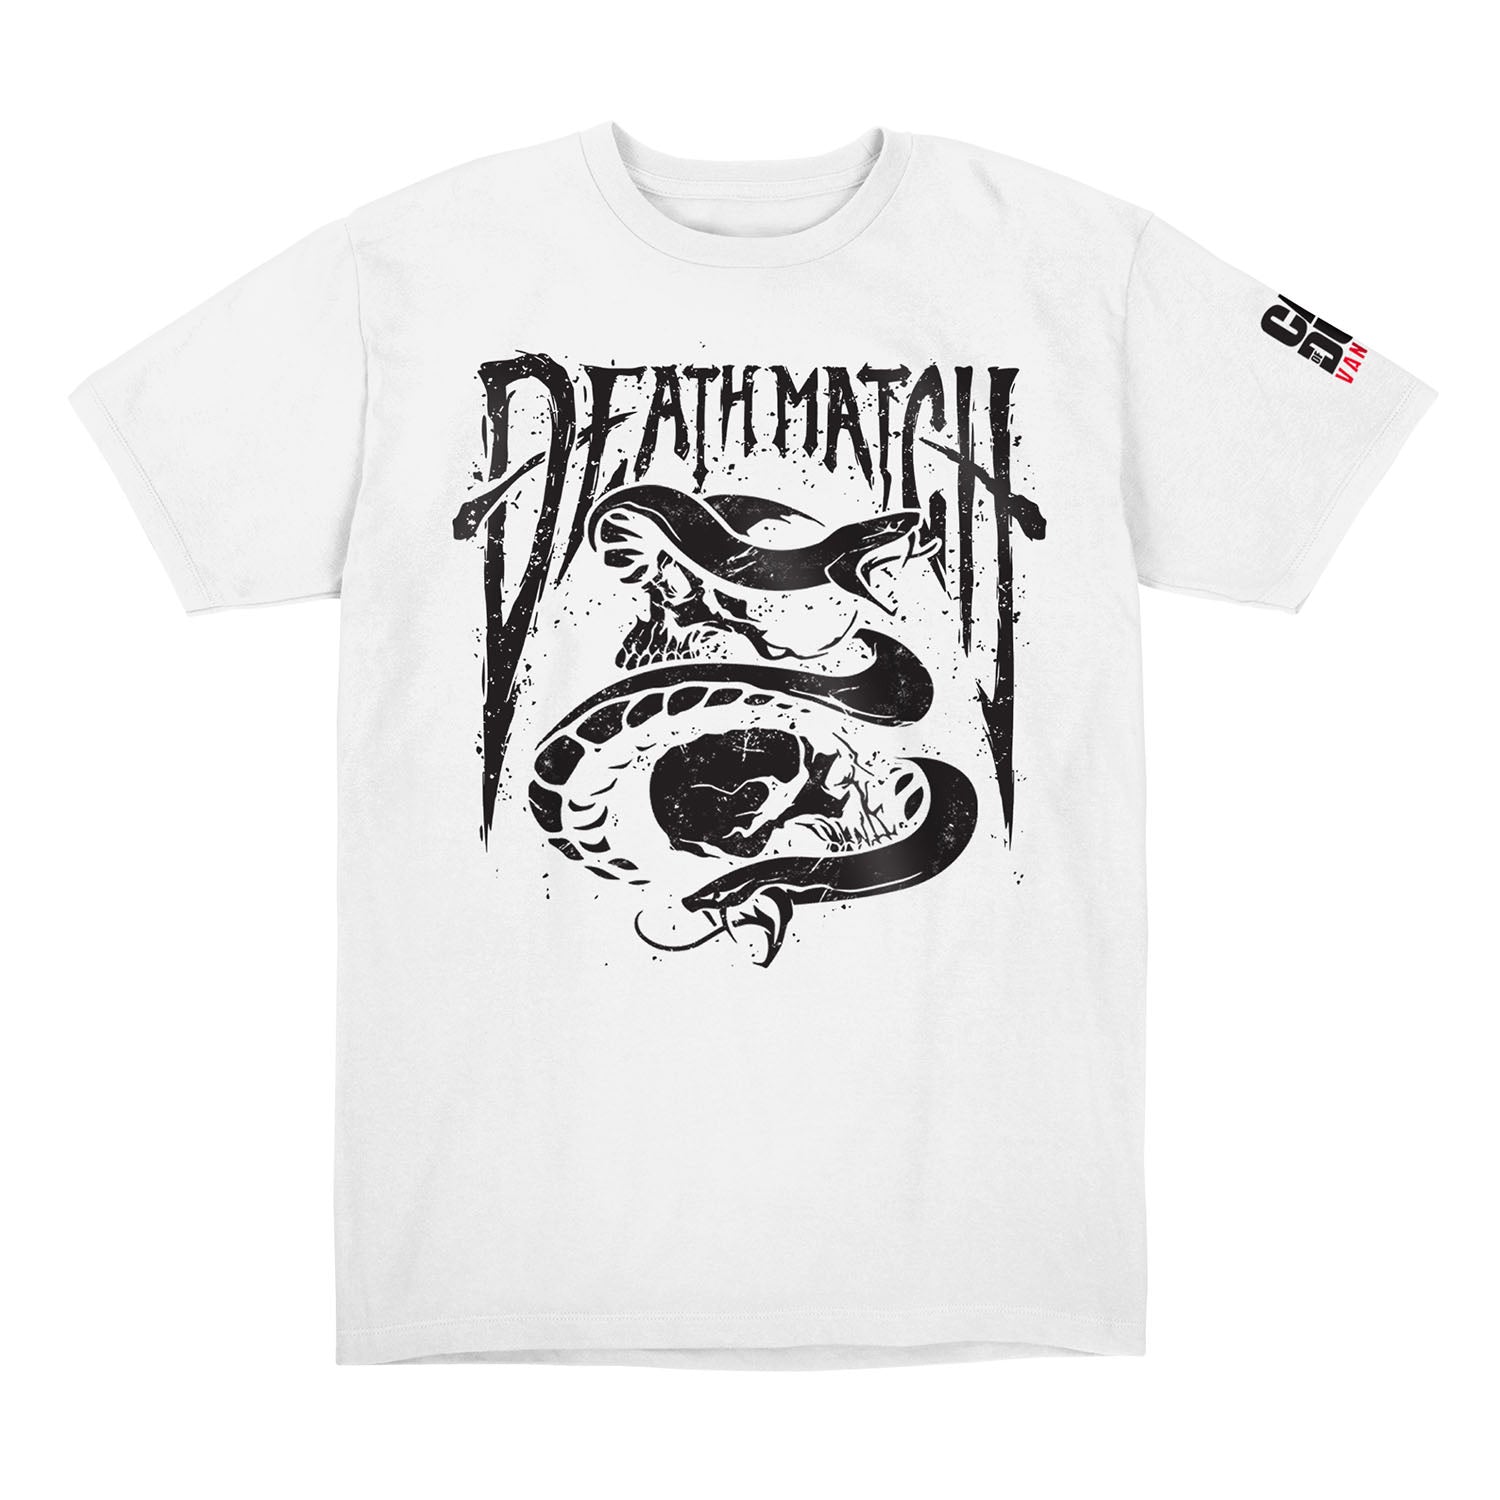 Call of Duty: Vanguard Deathmatch White T-Shirt - Front View